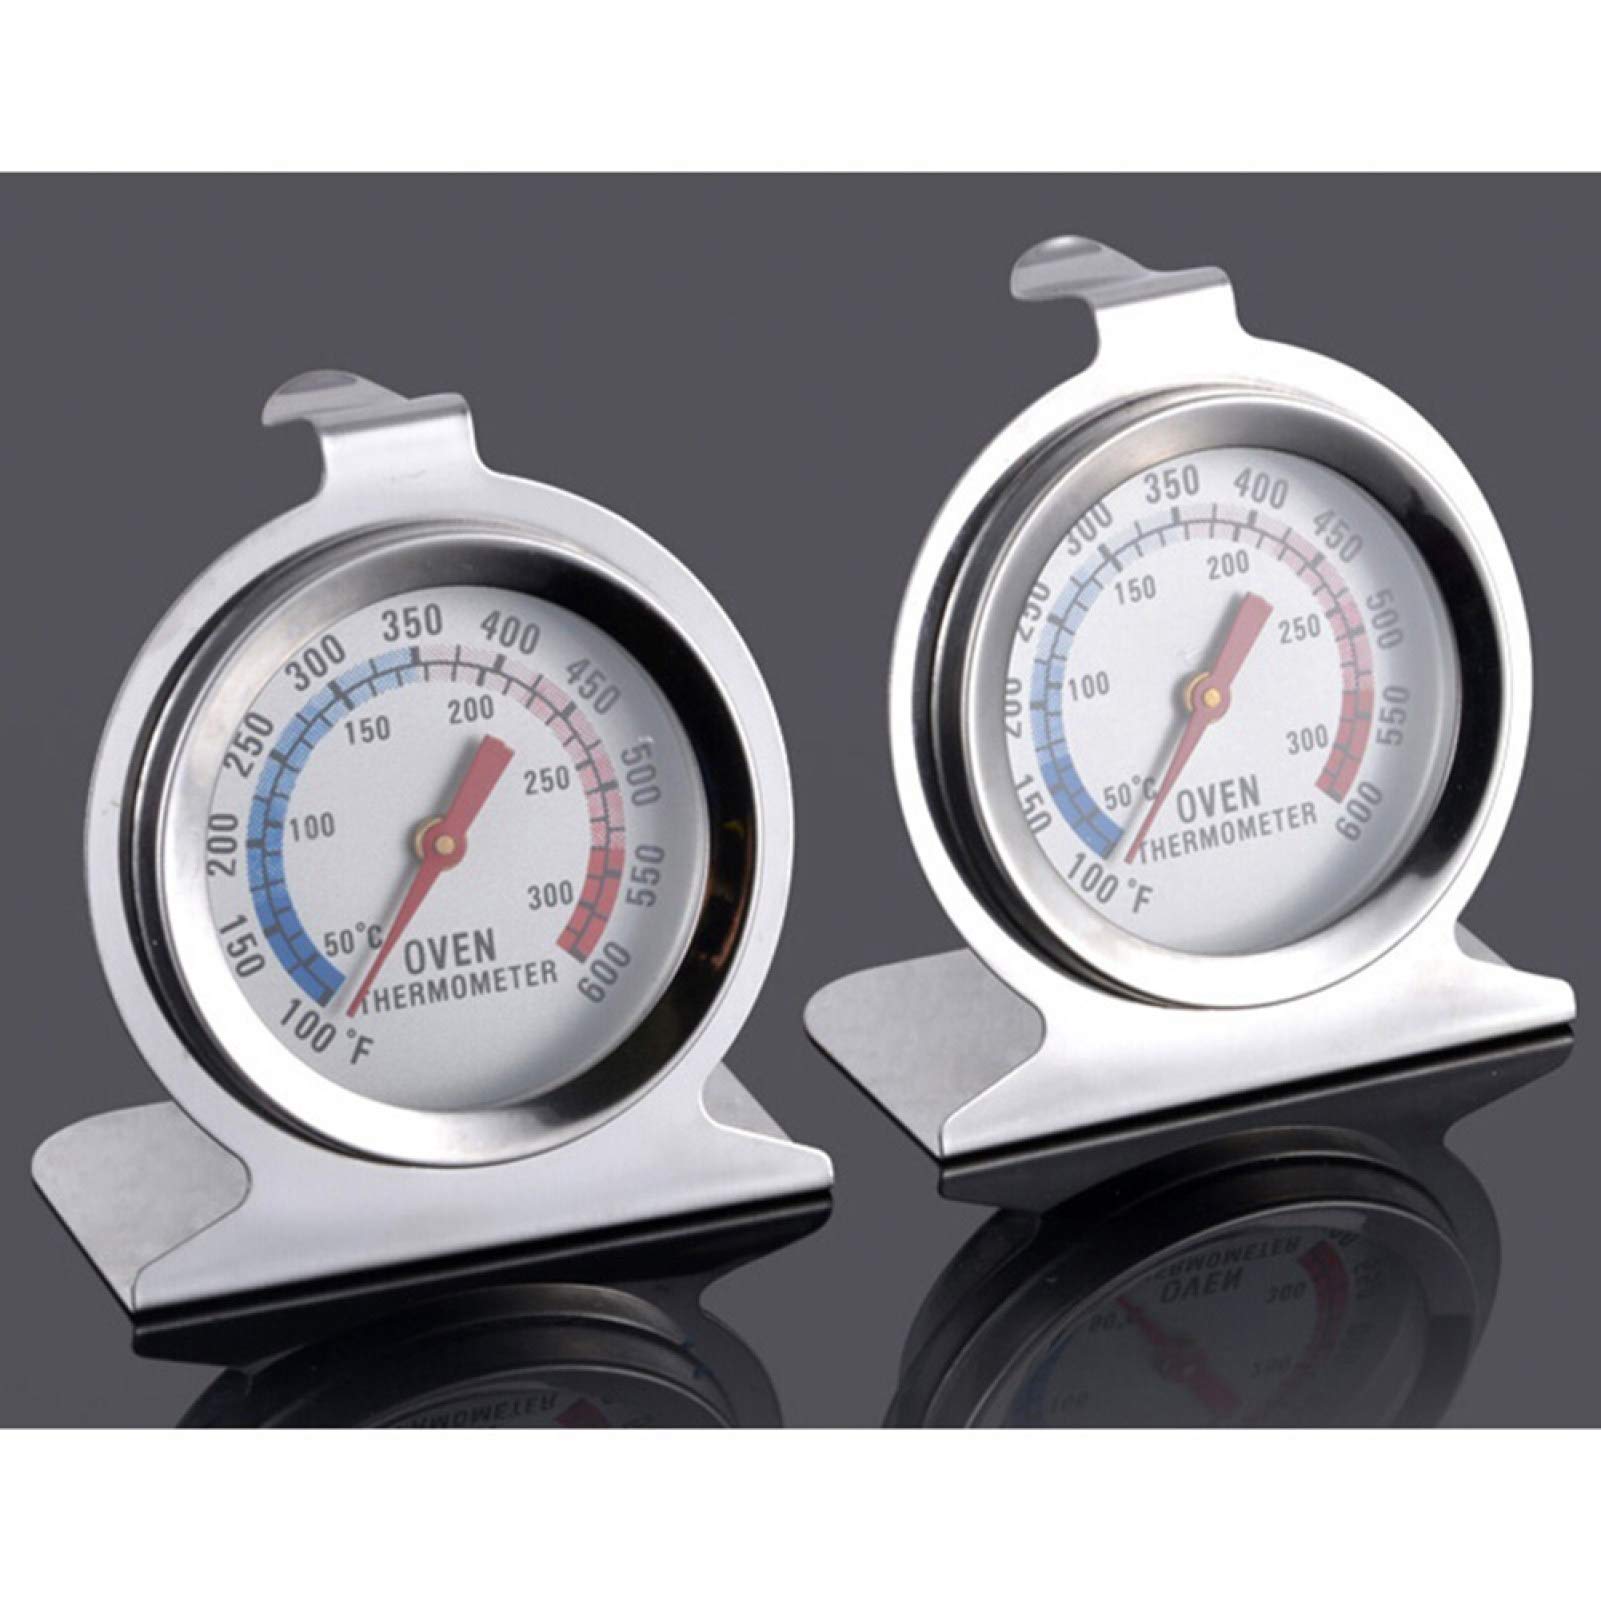 Cooking Thermometer, Dial BBQ Grill Cooker Oven Thermometer Frying Pan High Temperature Gauge Kitchen Baking Tool - Silver